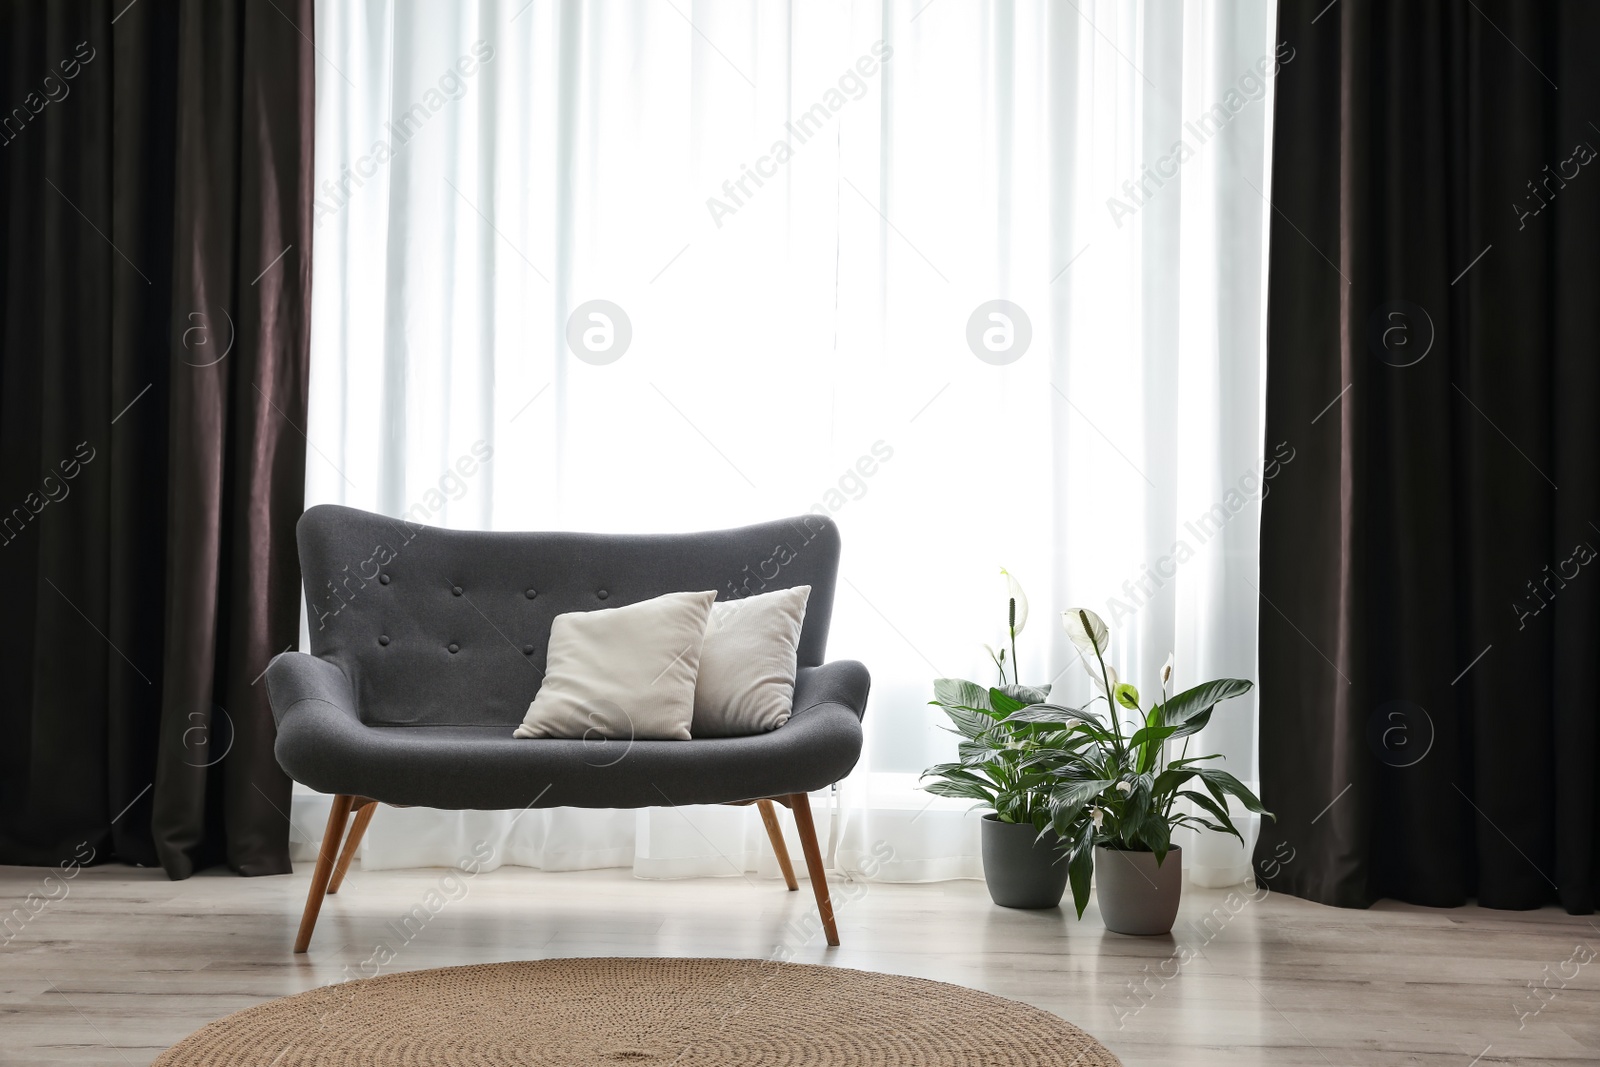 Photo of Comfortable sofa near window with elegant curtains in room